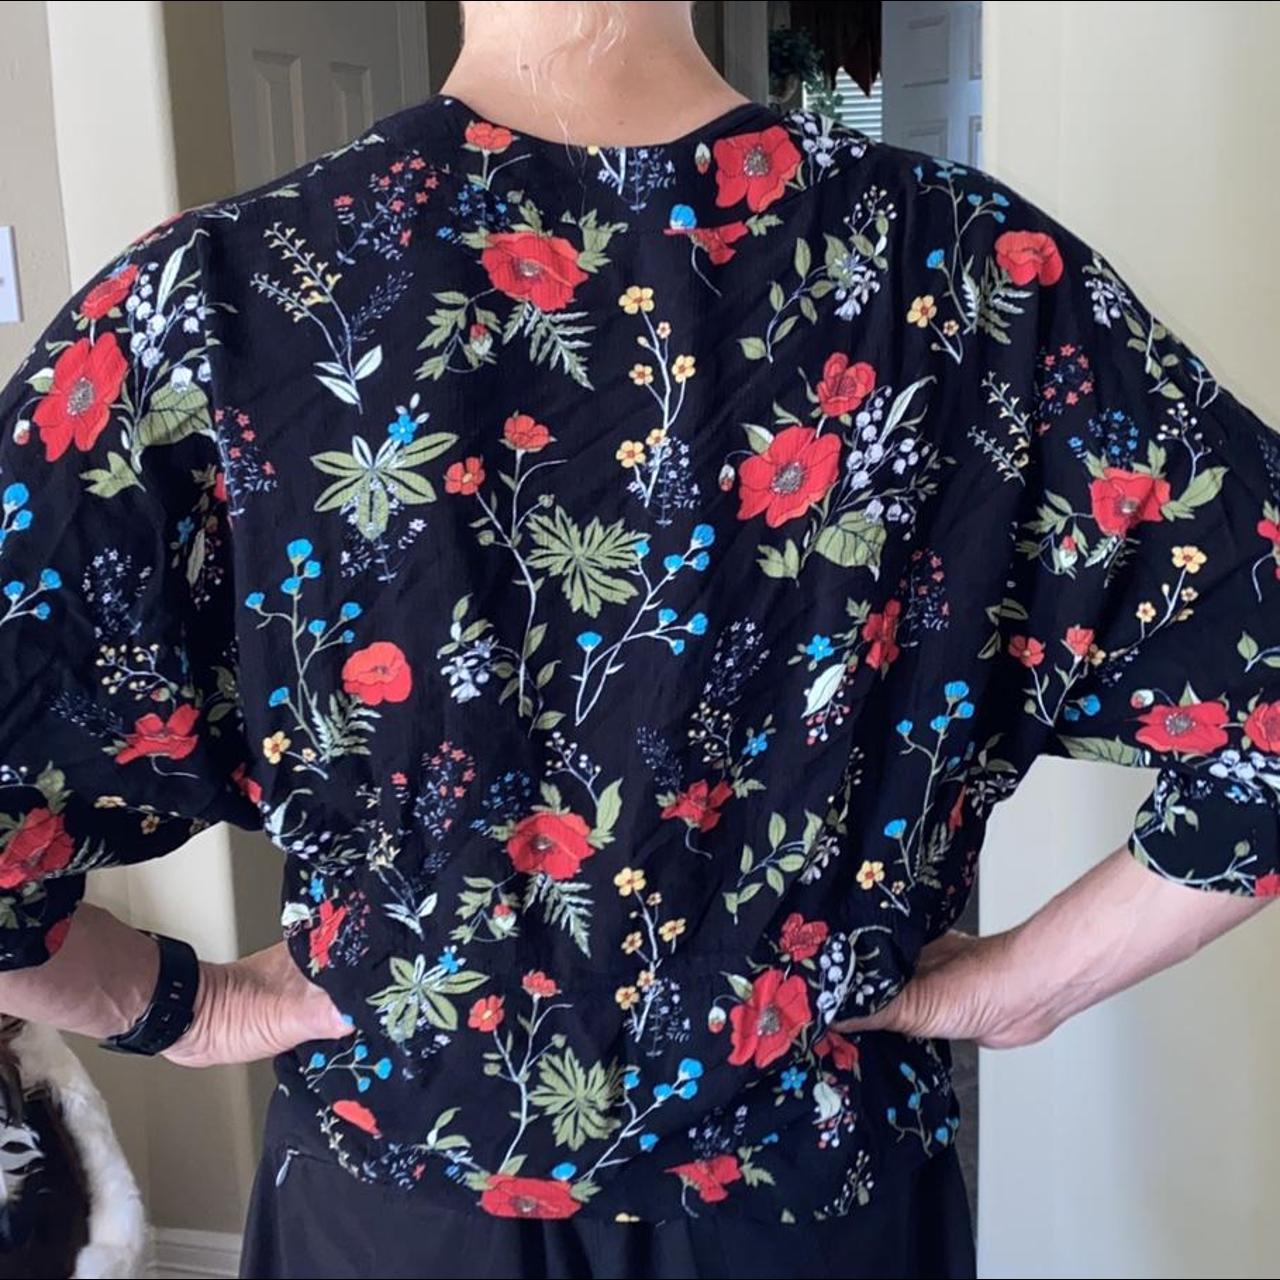 Floral Blouse With Front Tie